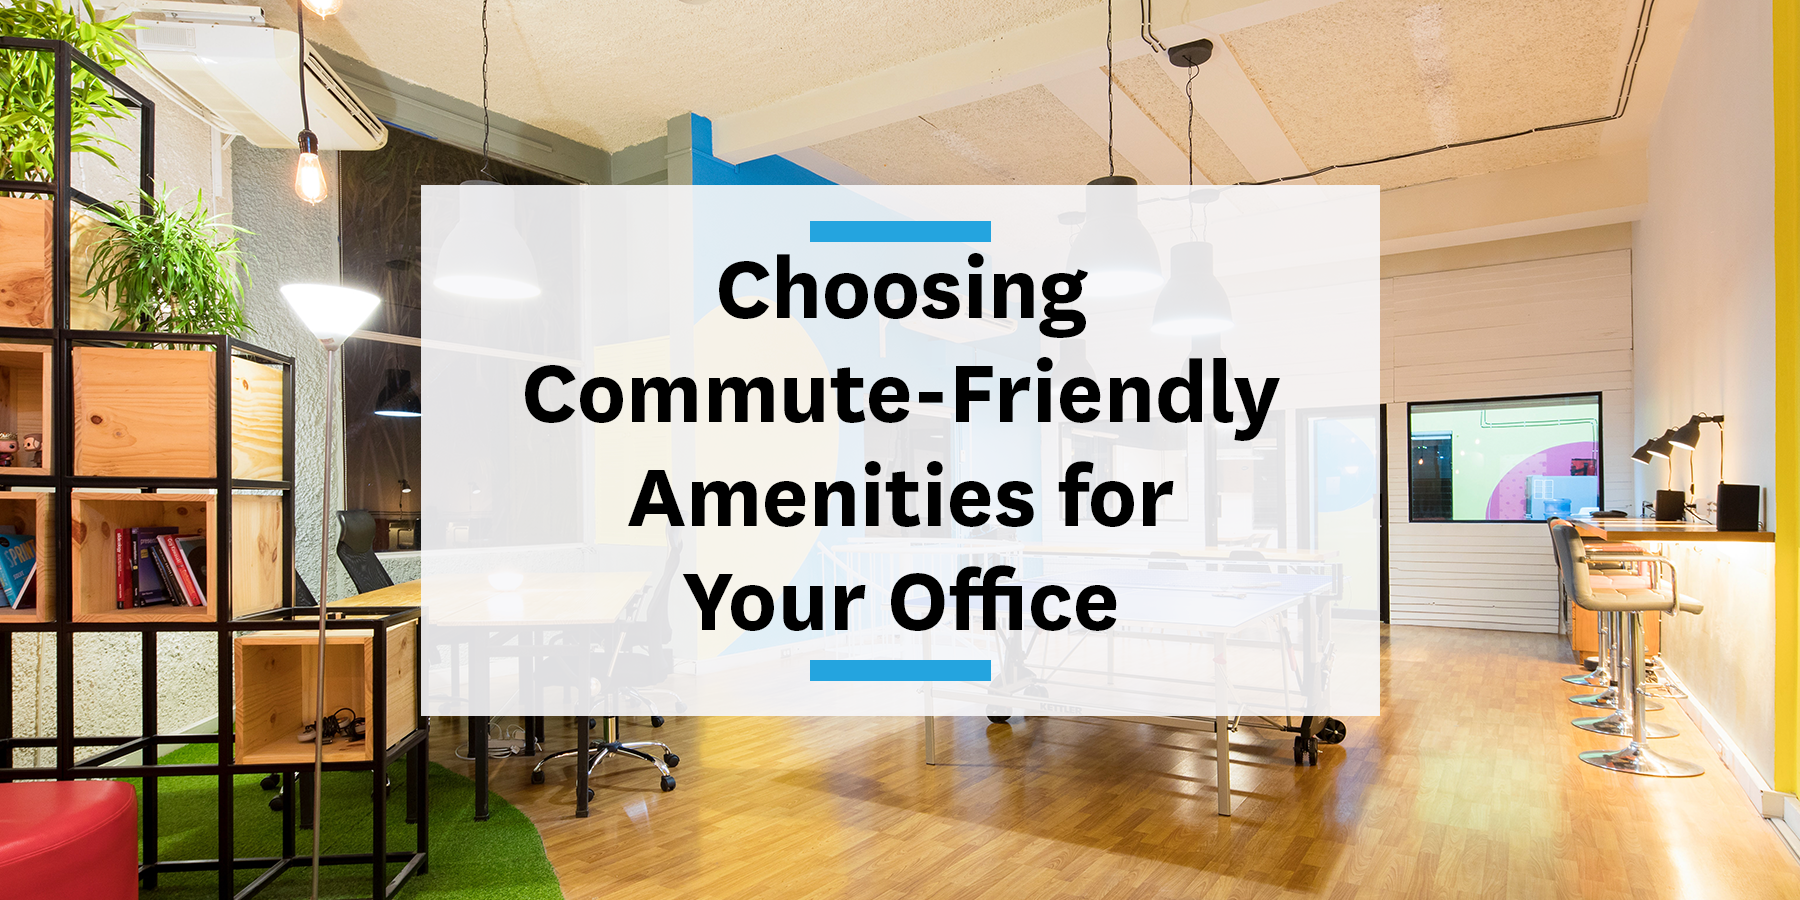 Feature image for choosing commute-friendly amenities for your office